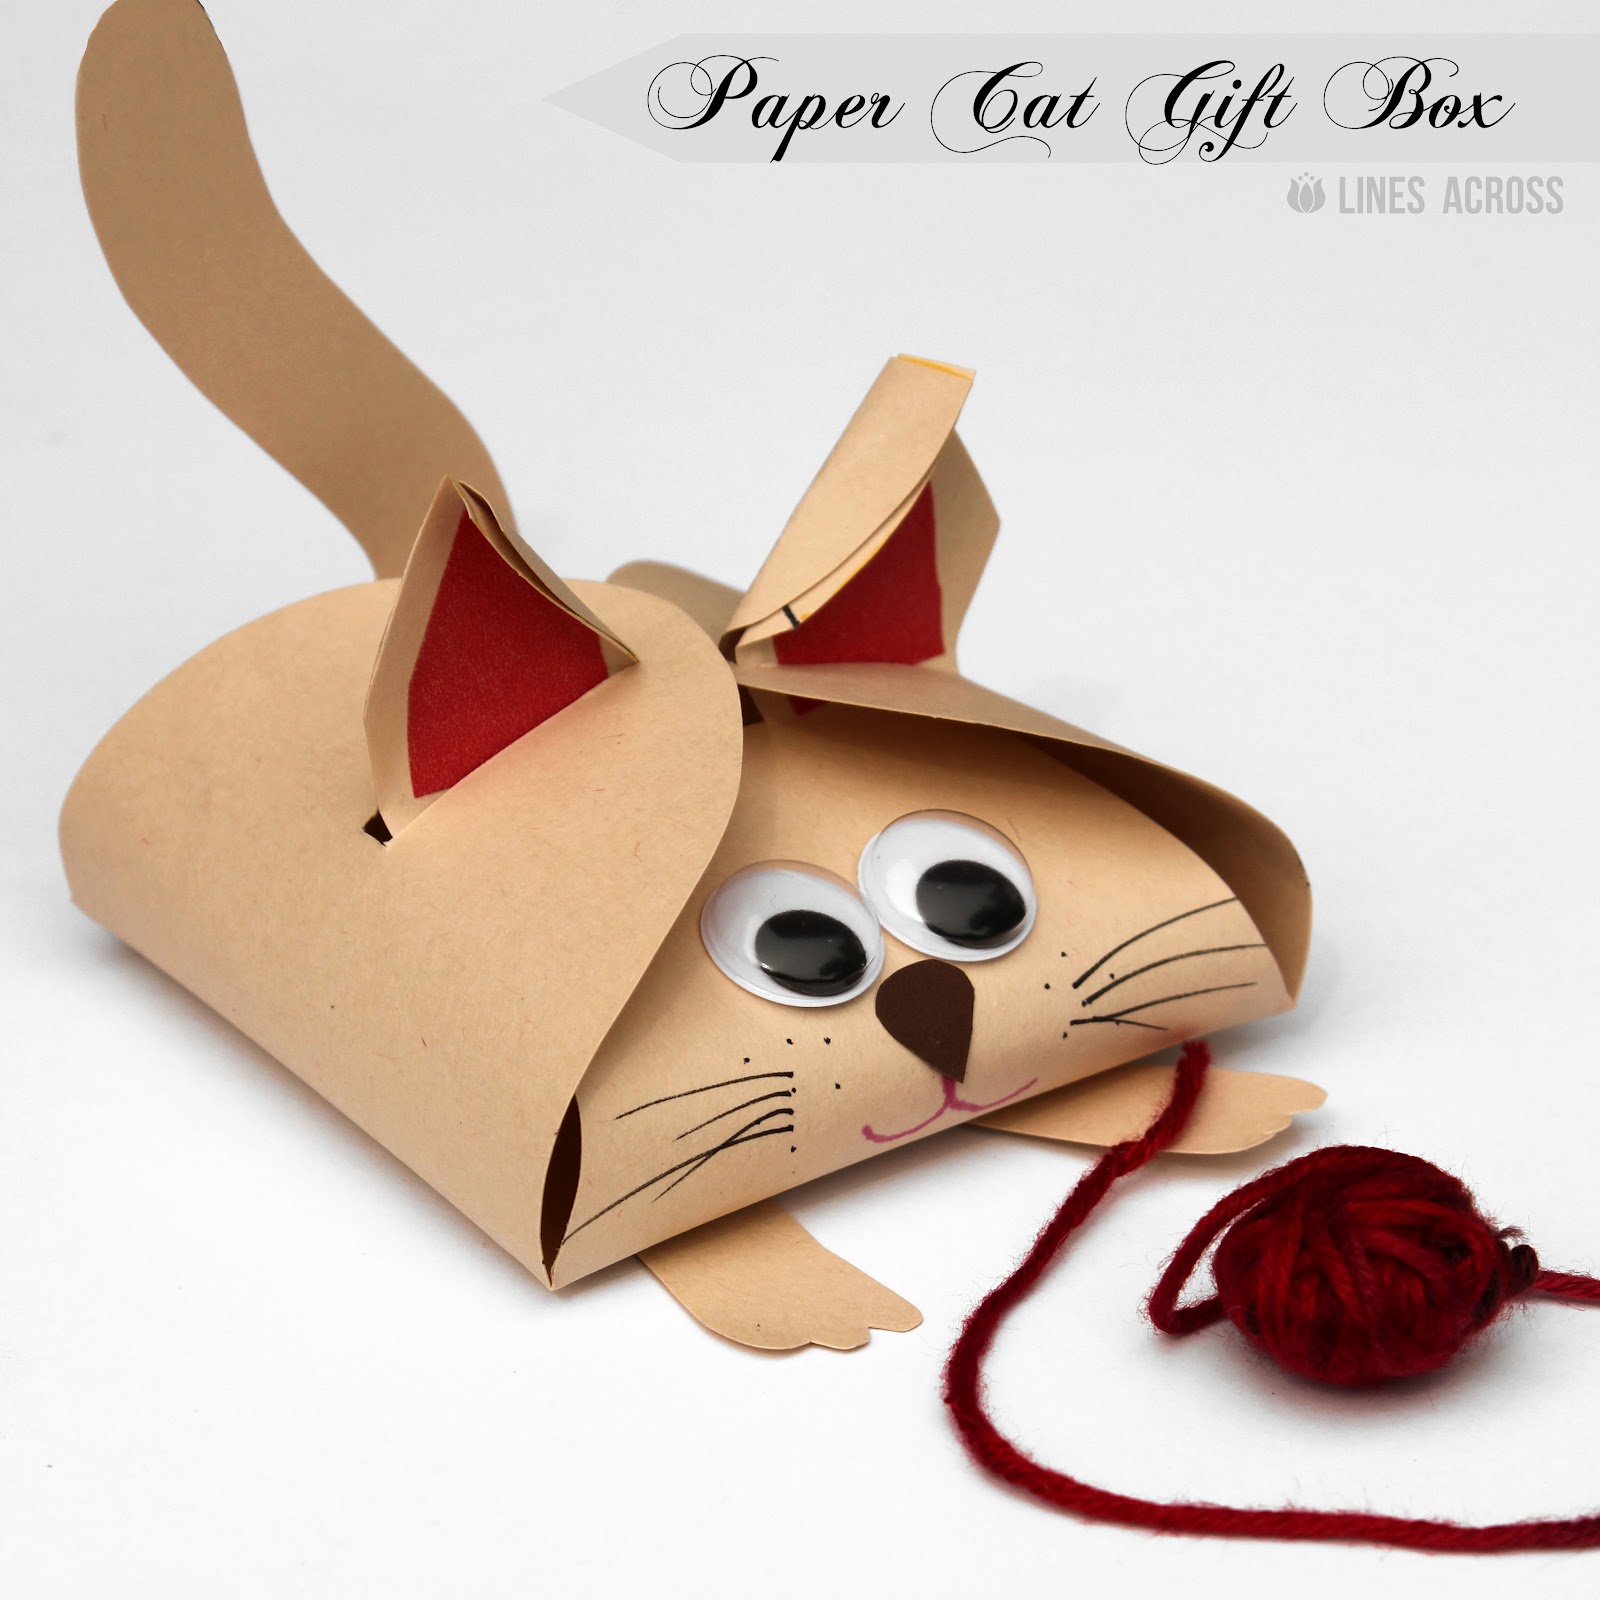 Dog and Cat Paper Gift Boxes - Lines Across